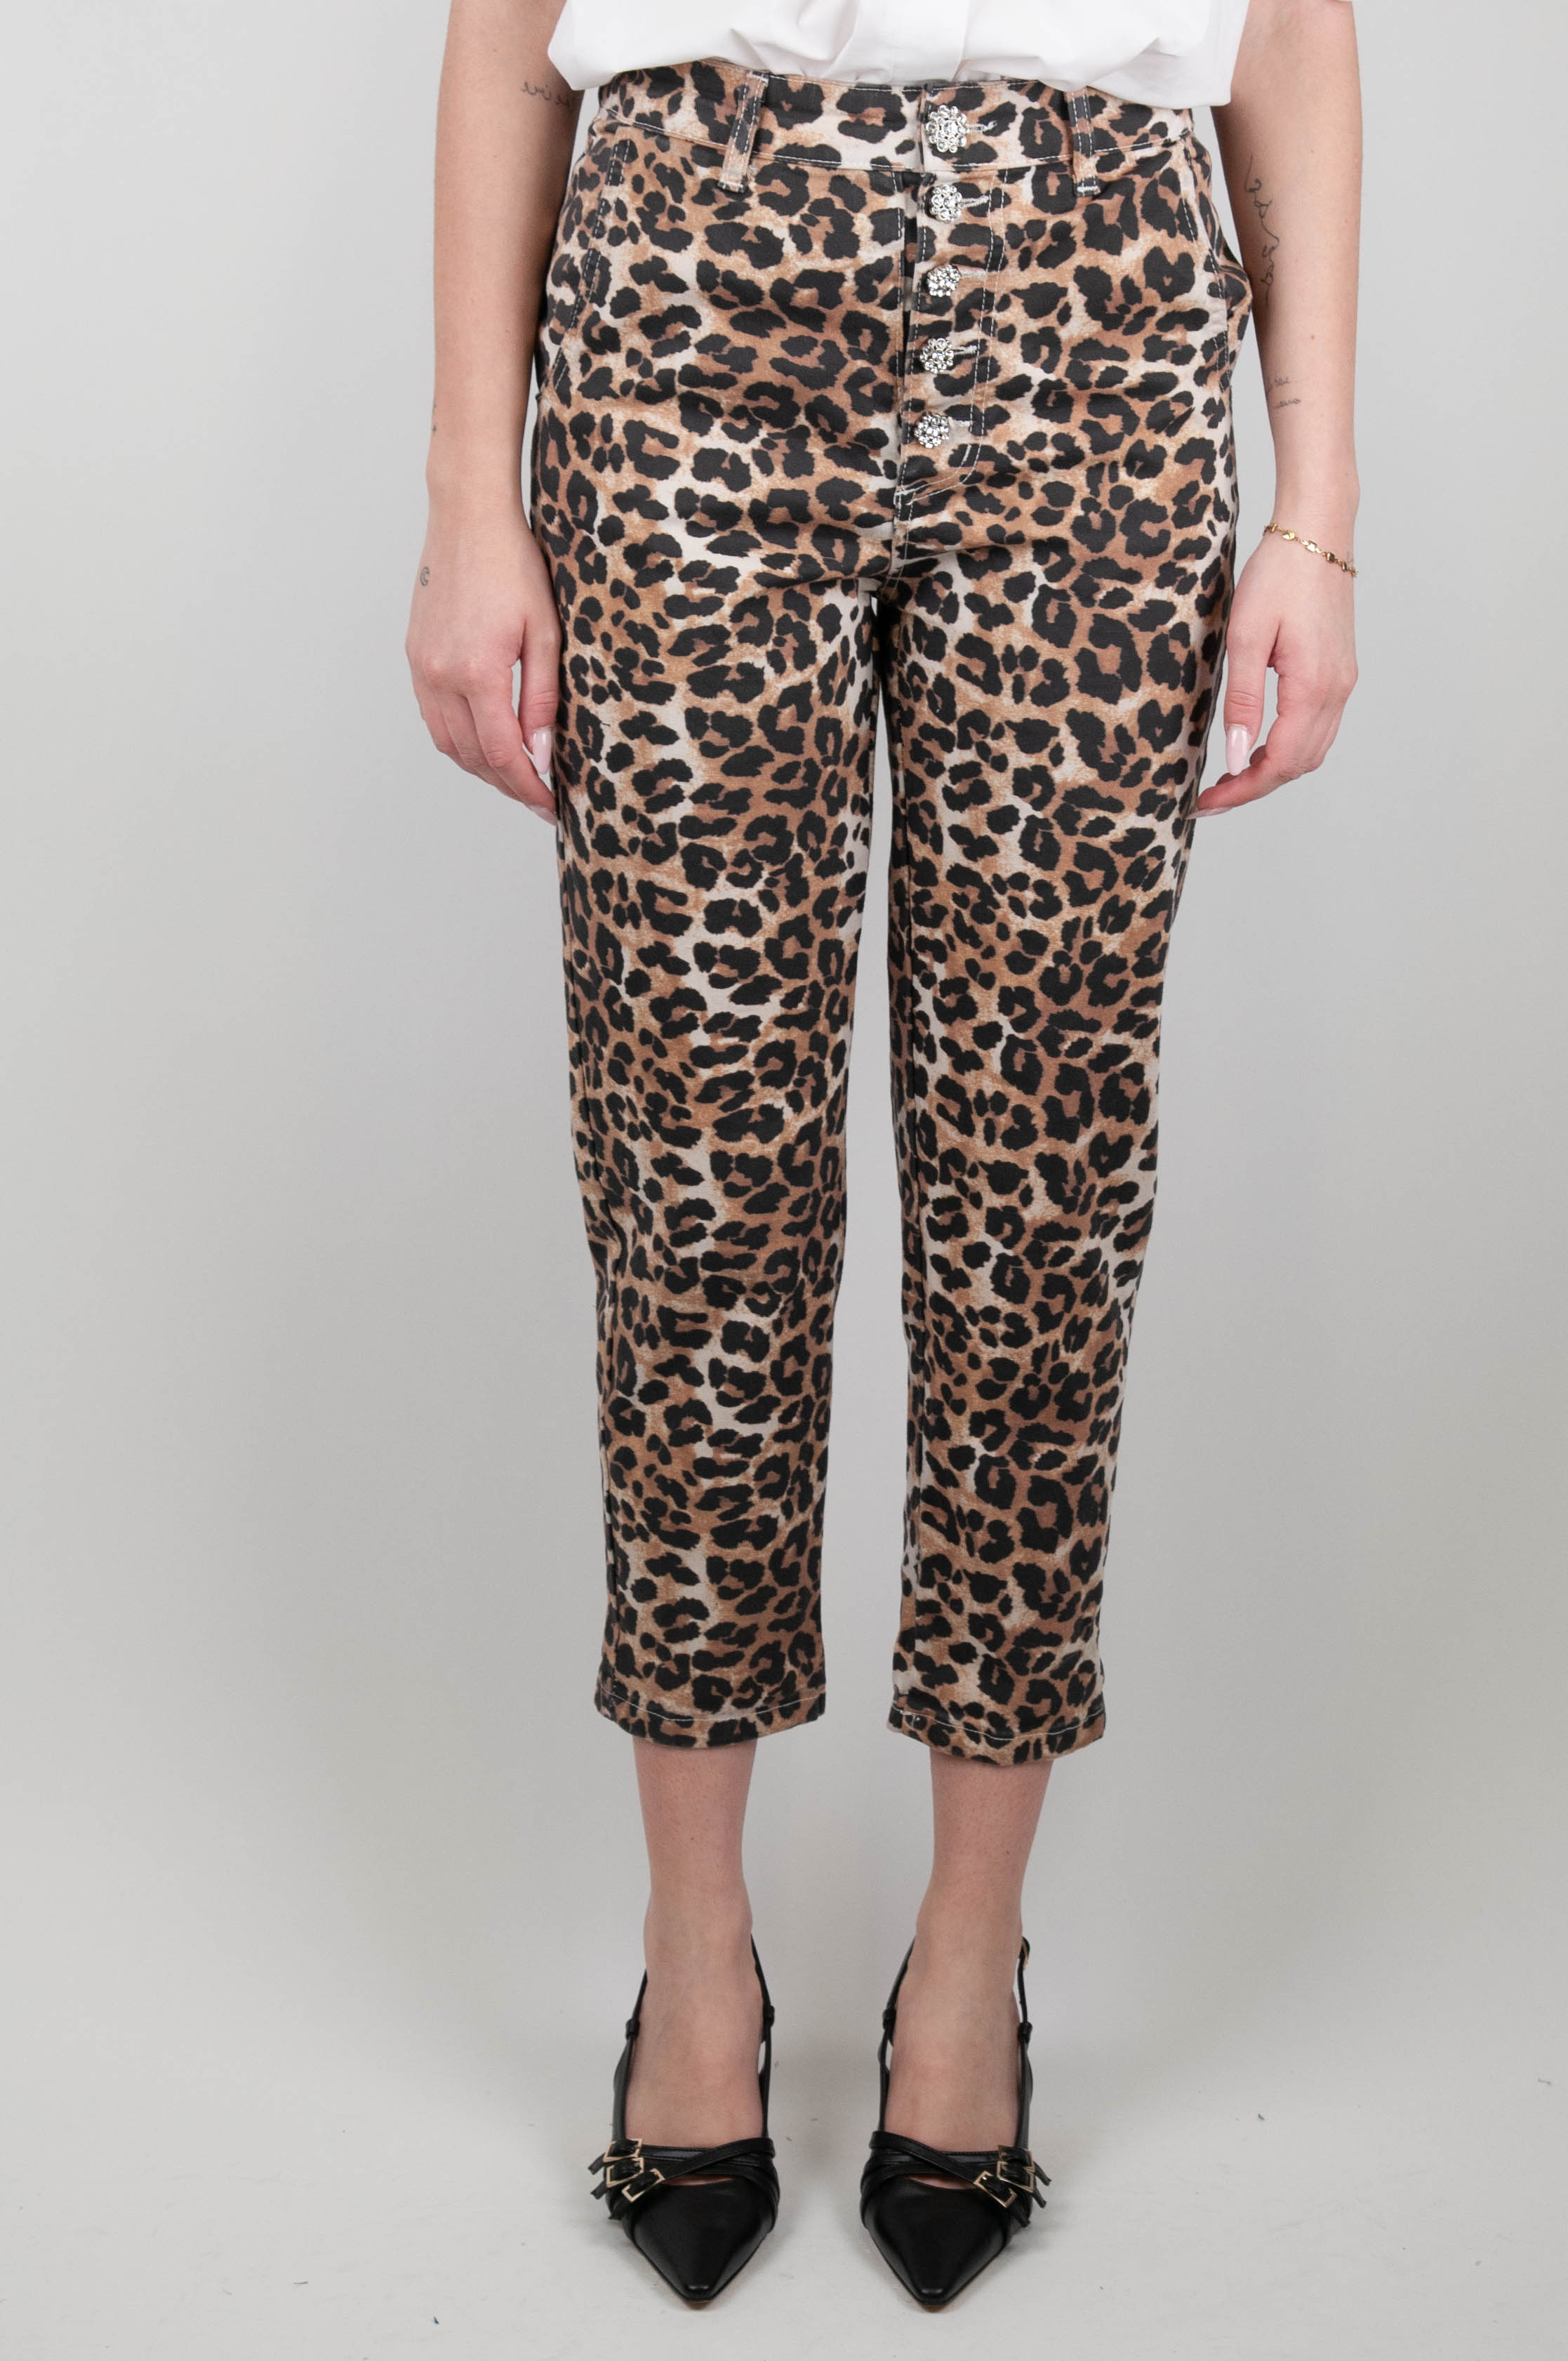 Tension in - Animal print trousers with jewel buttons